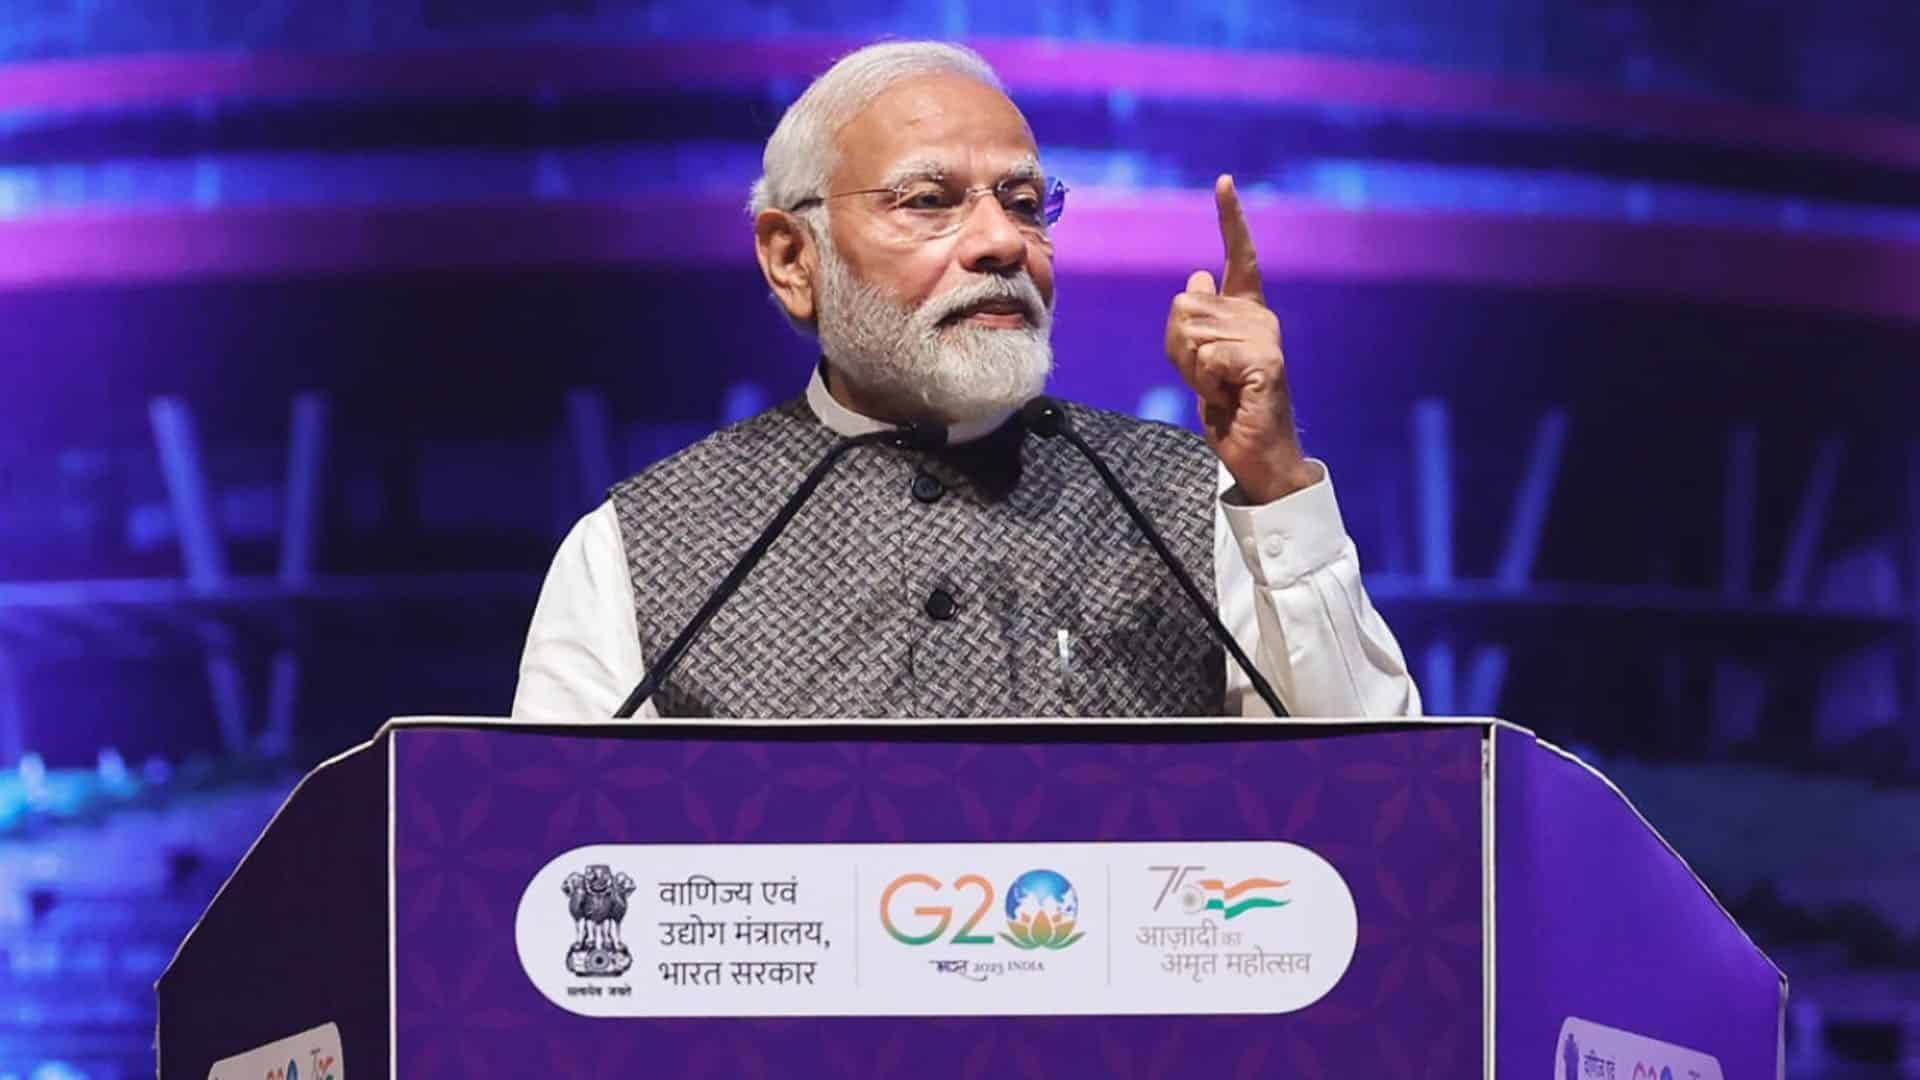 India will be among world's top 3 economies in BJP's 3rd term: Modi